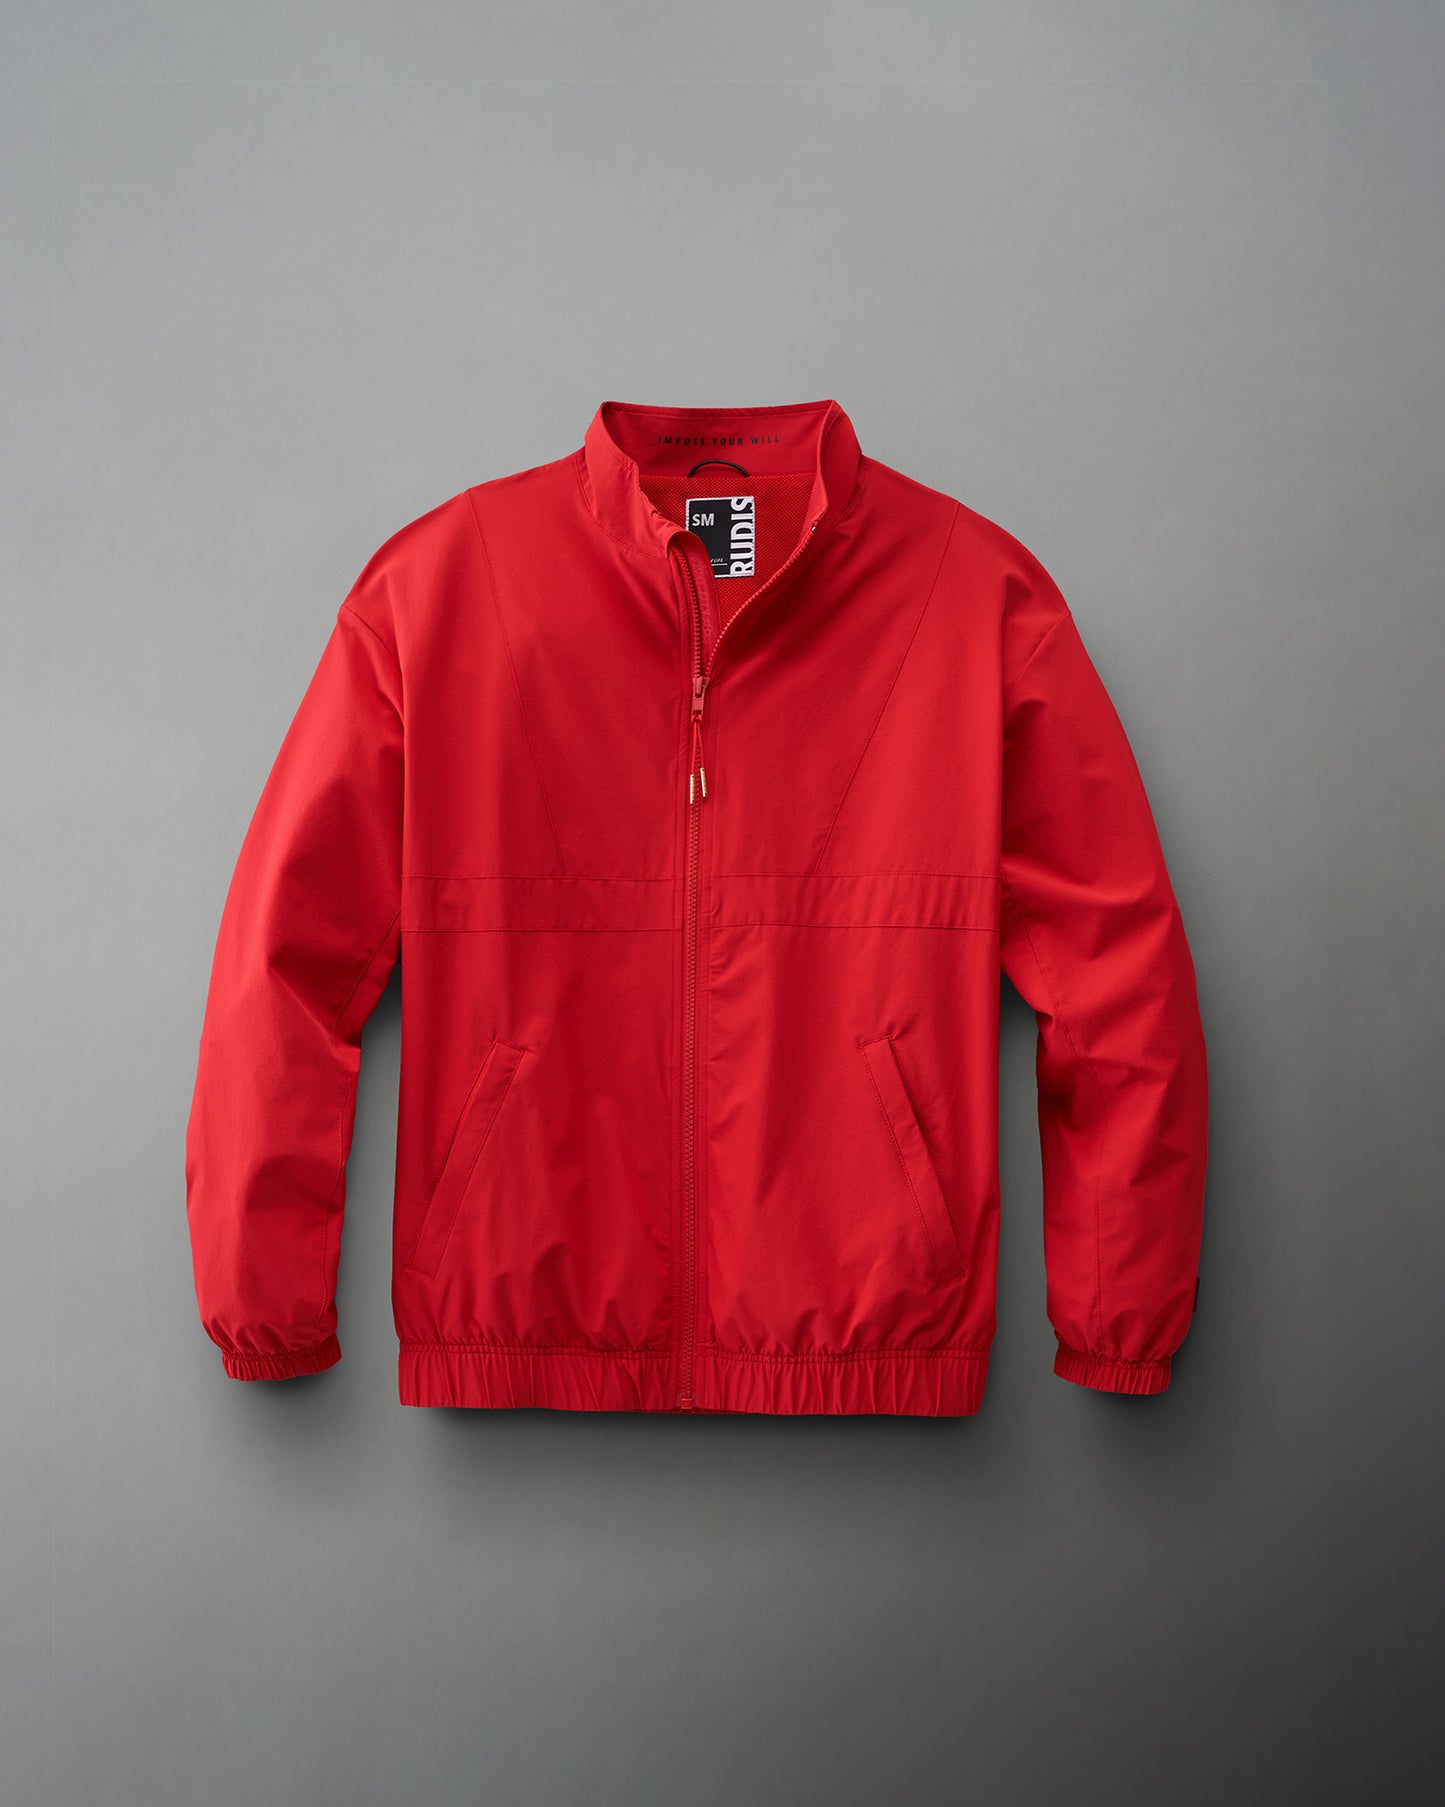 RUDIS Gold Standard Youth Jacket - Red